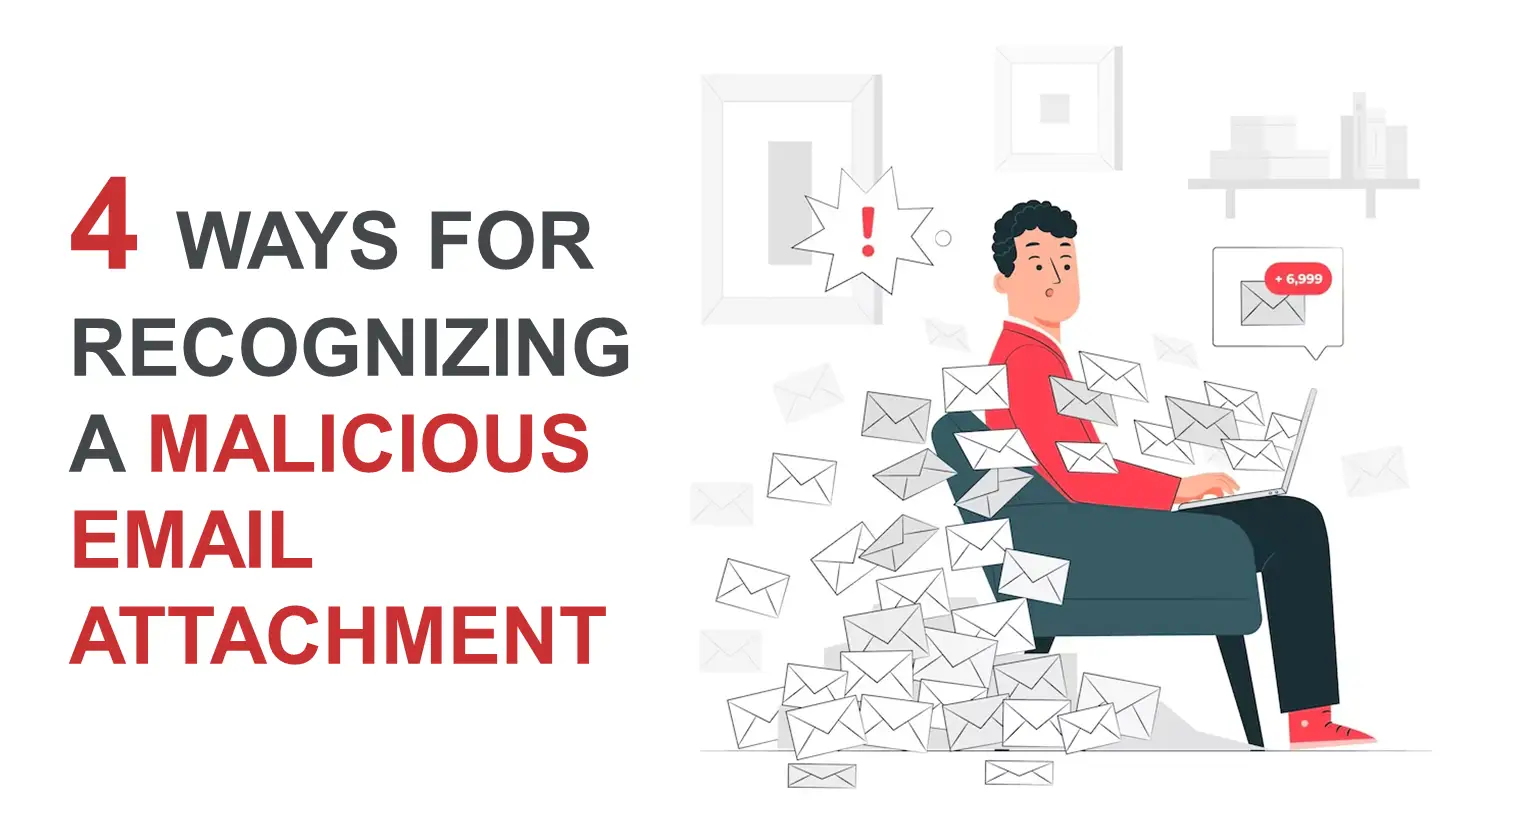 4 Ways for Recognizing a Malicious Email Attachment